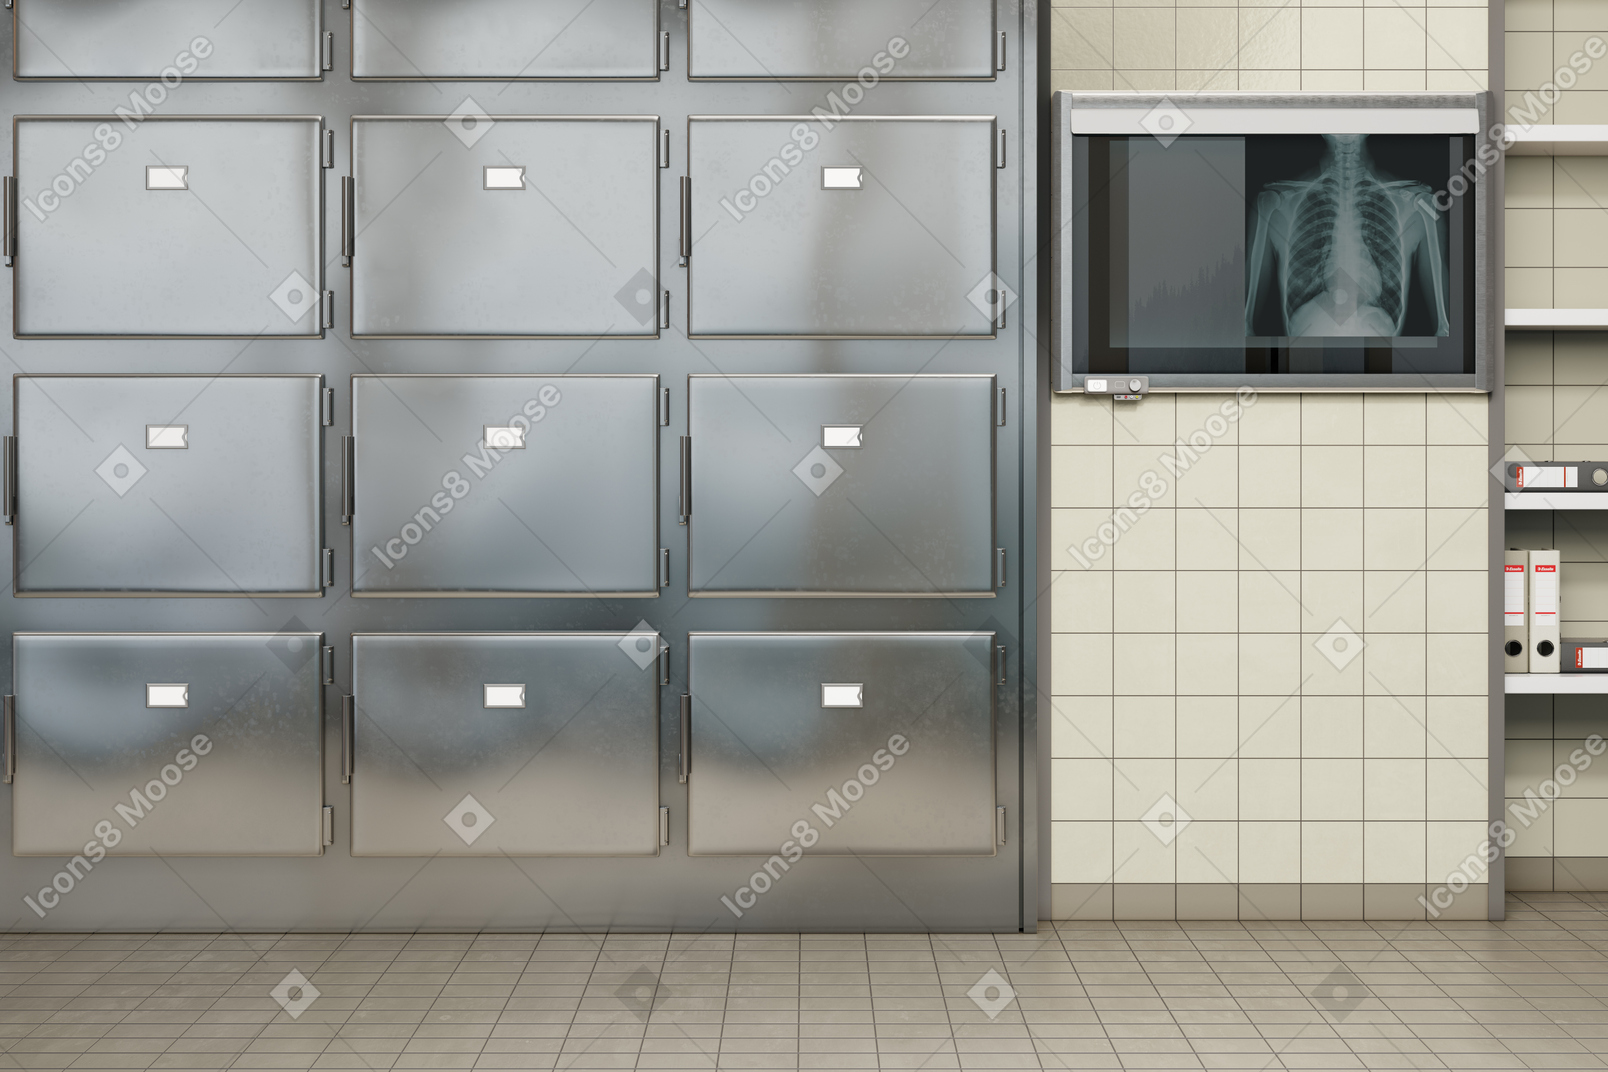 Morgue with mortuary cabinets and x ray scan on screen